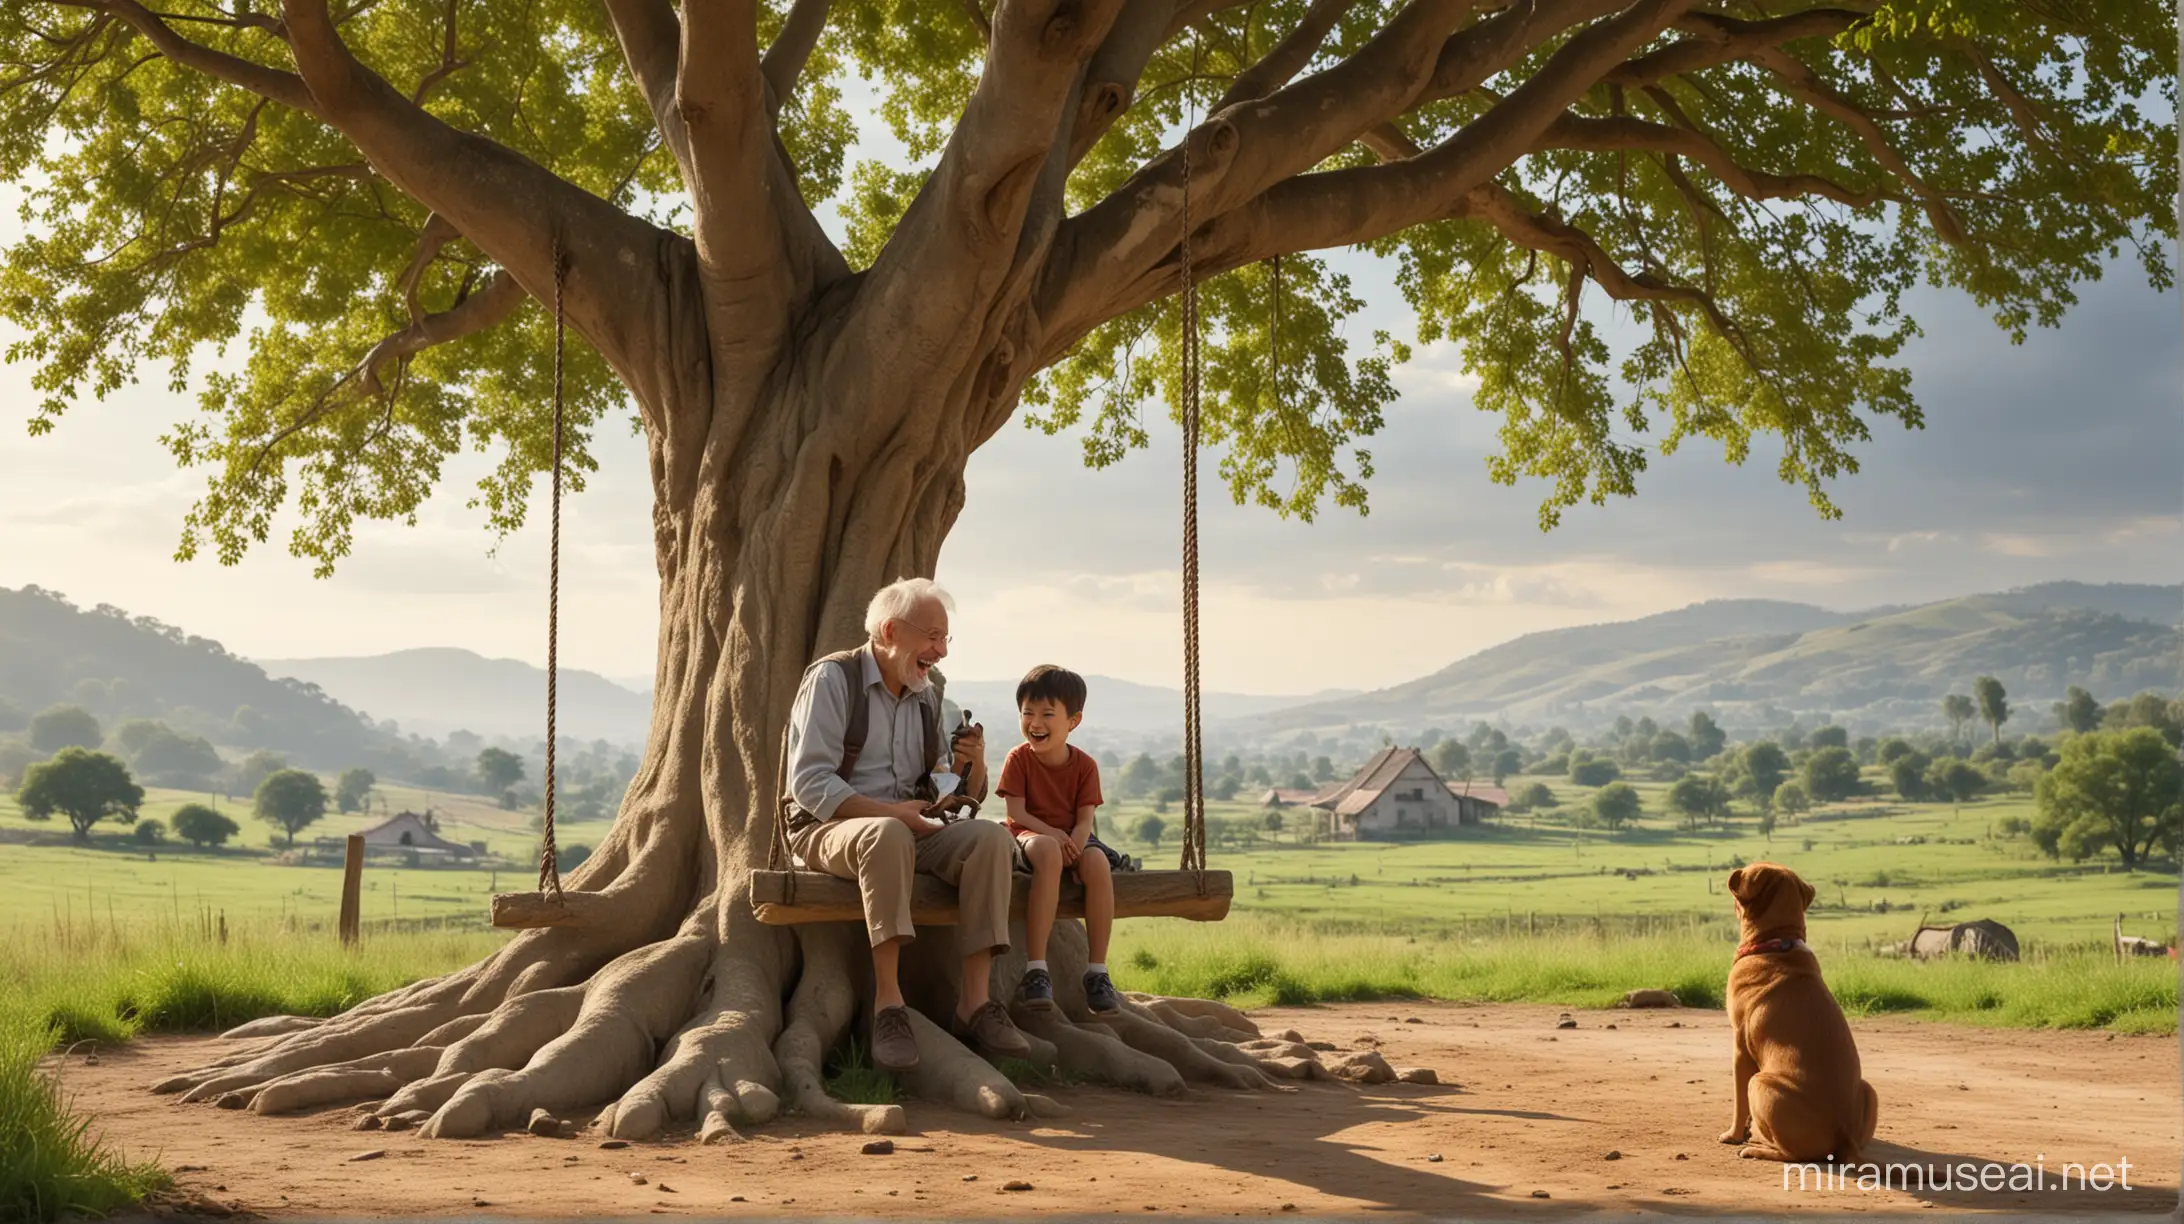 There is a swing hanging from a big tree, and a little boy is sitting on it, laughing joyfully. Beside him, a small dog is watching the boy, and an old man is sitting on the stone by the tree, smiling while observing the little boy.